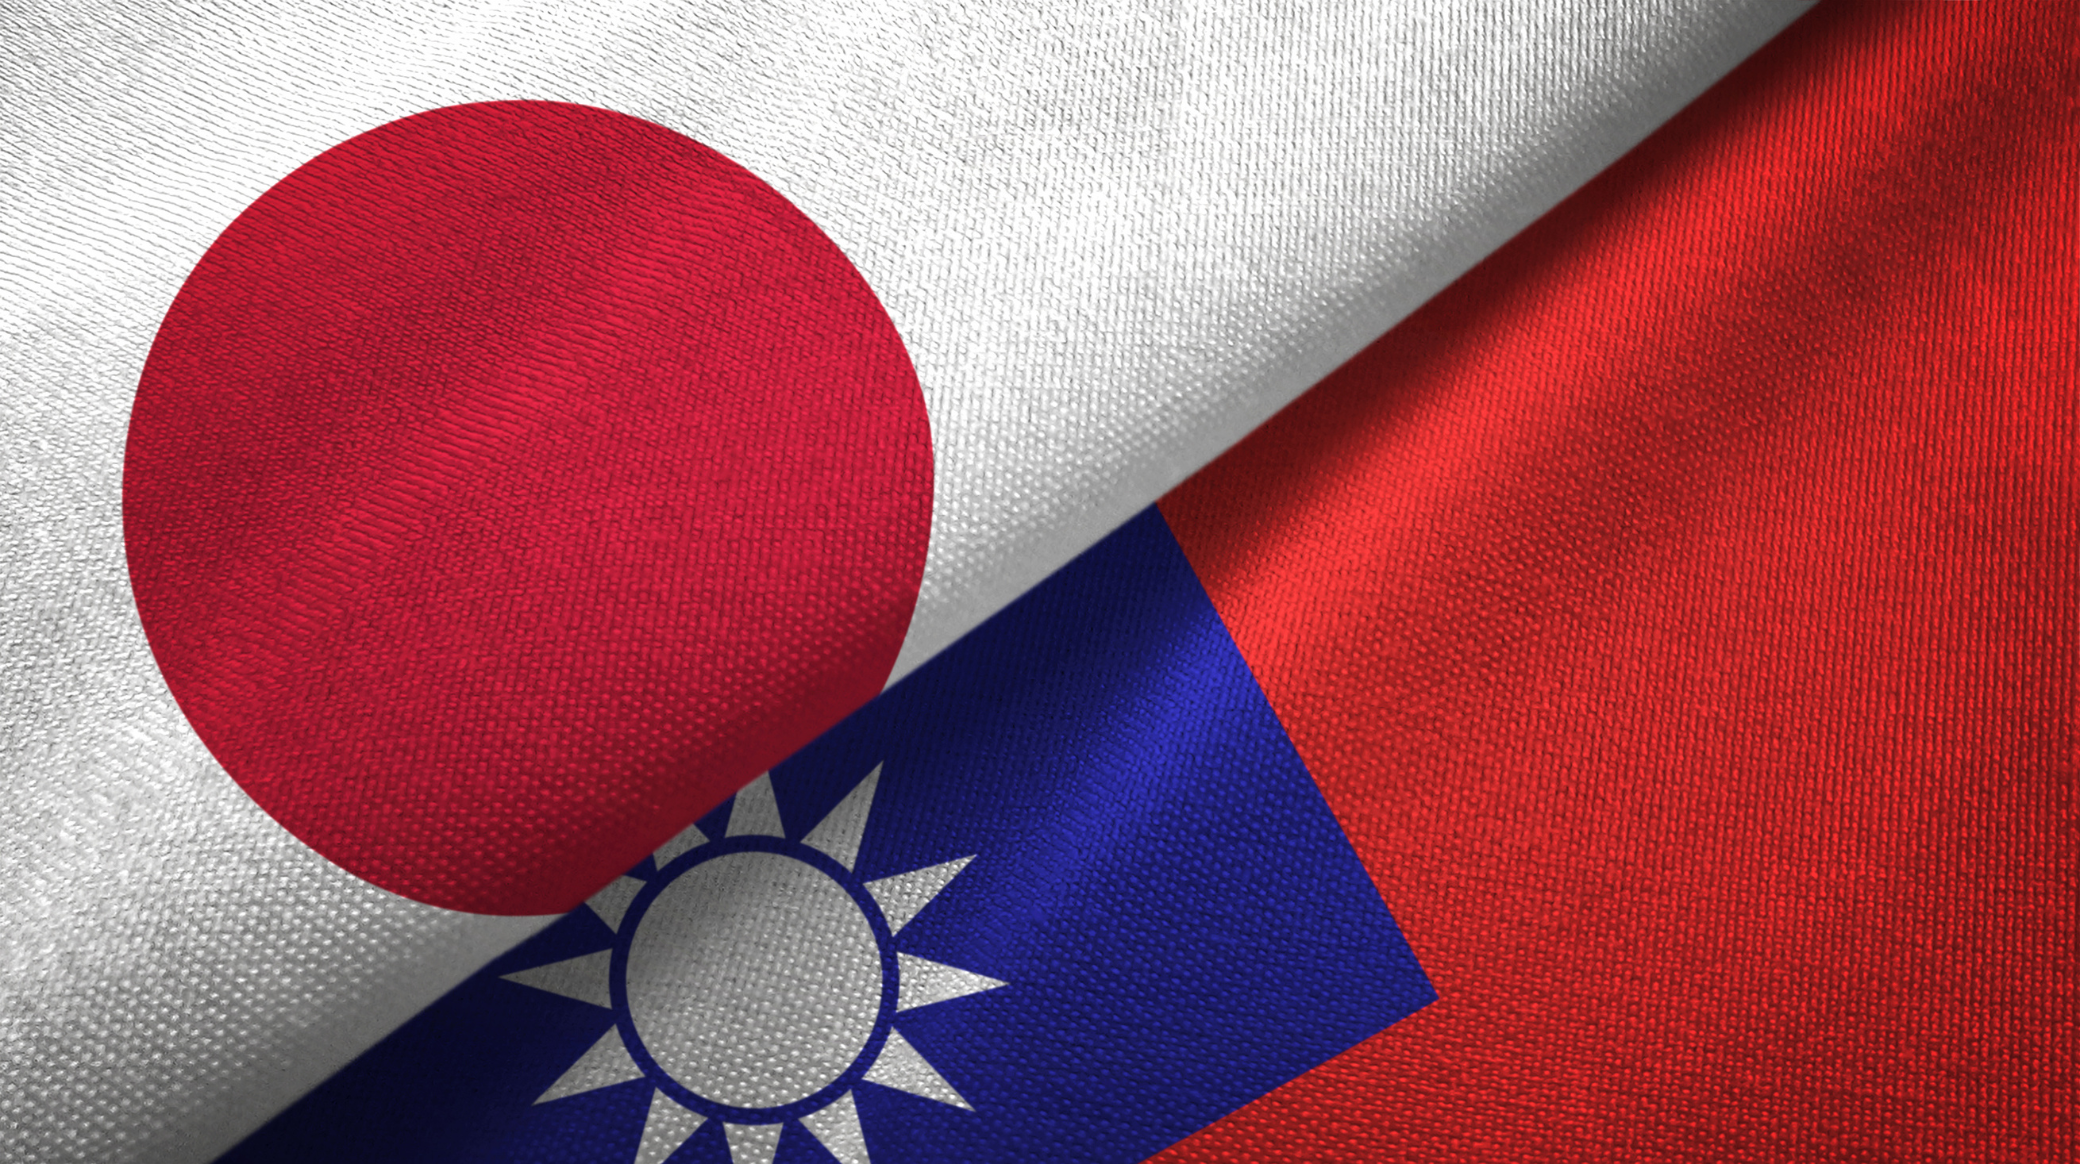 PacNet #45 – The prescience of Abe’s vision for Taiwan